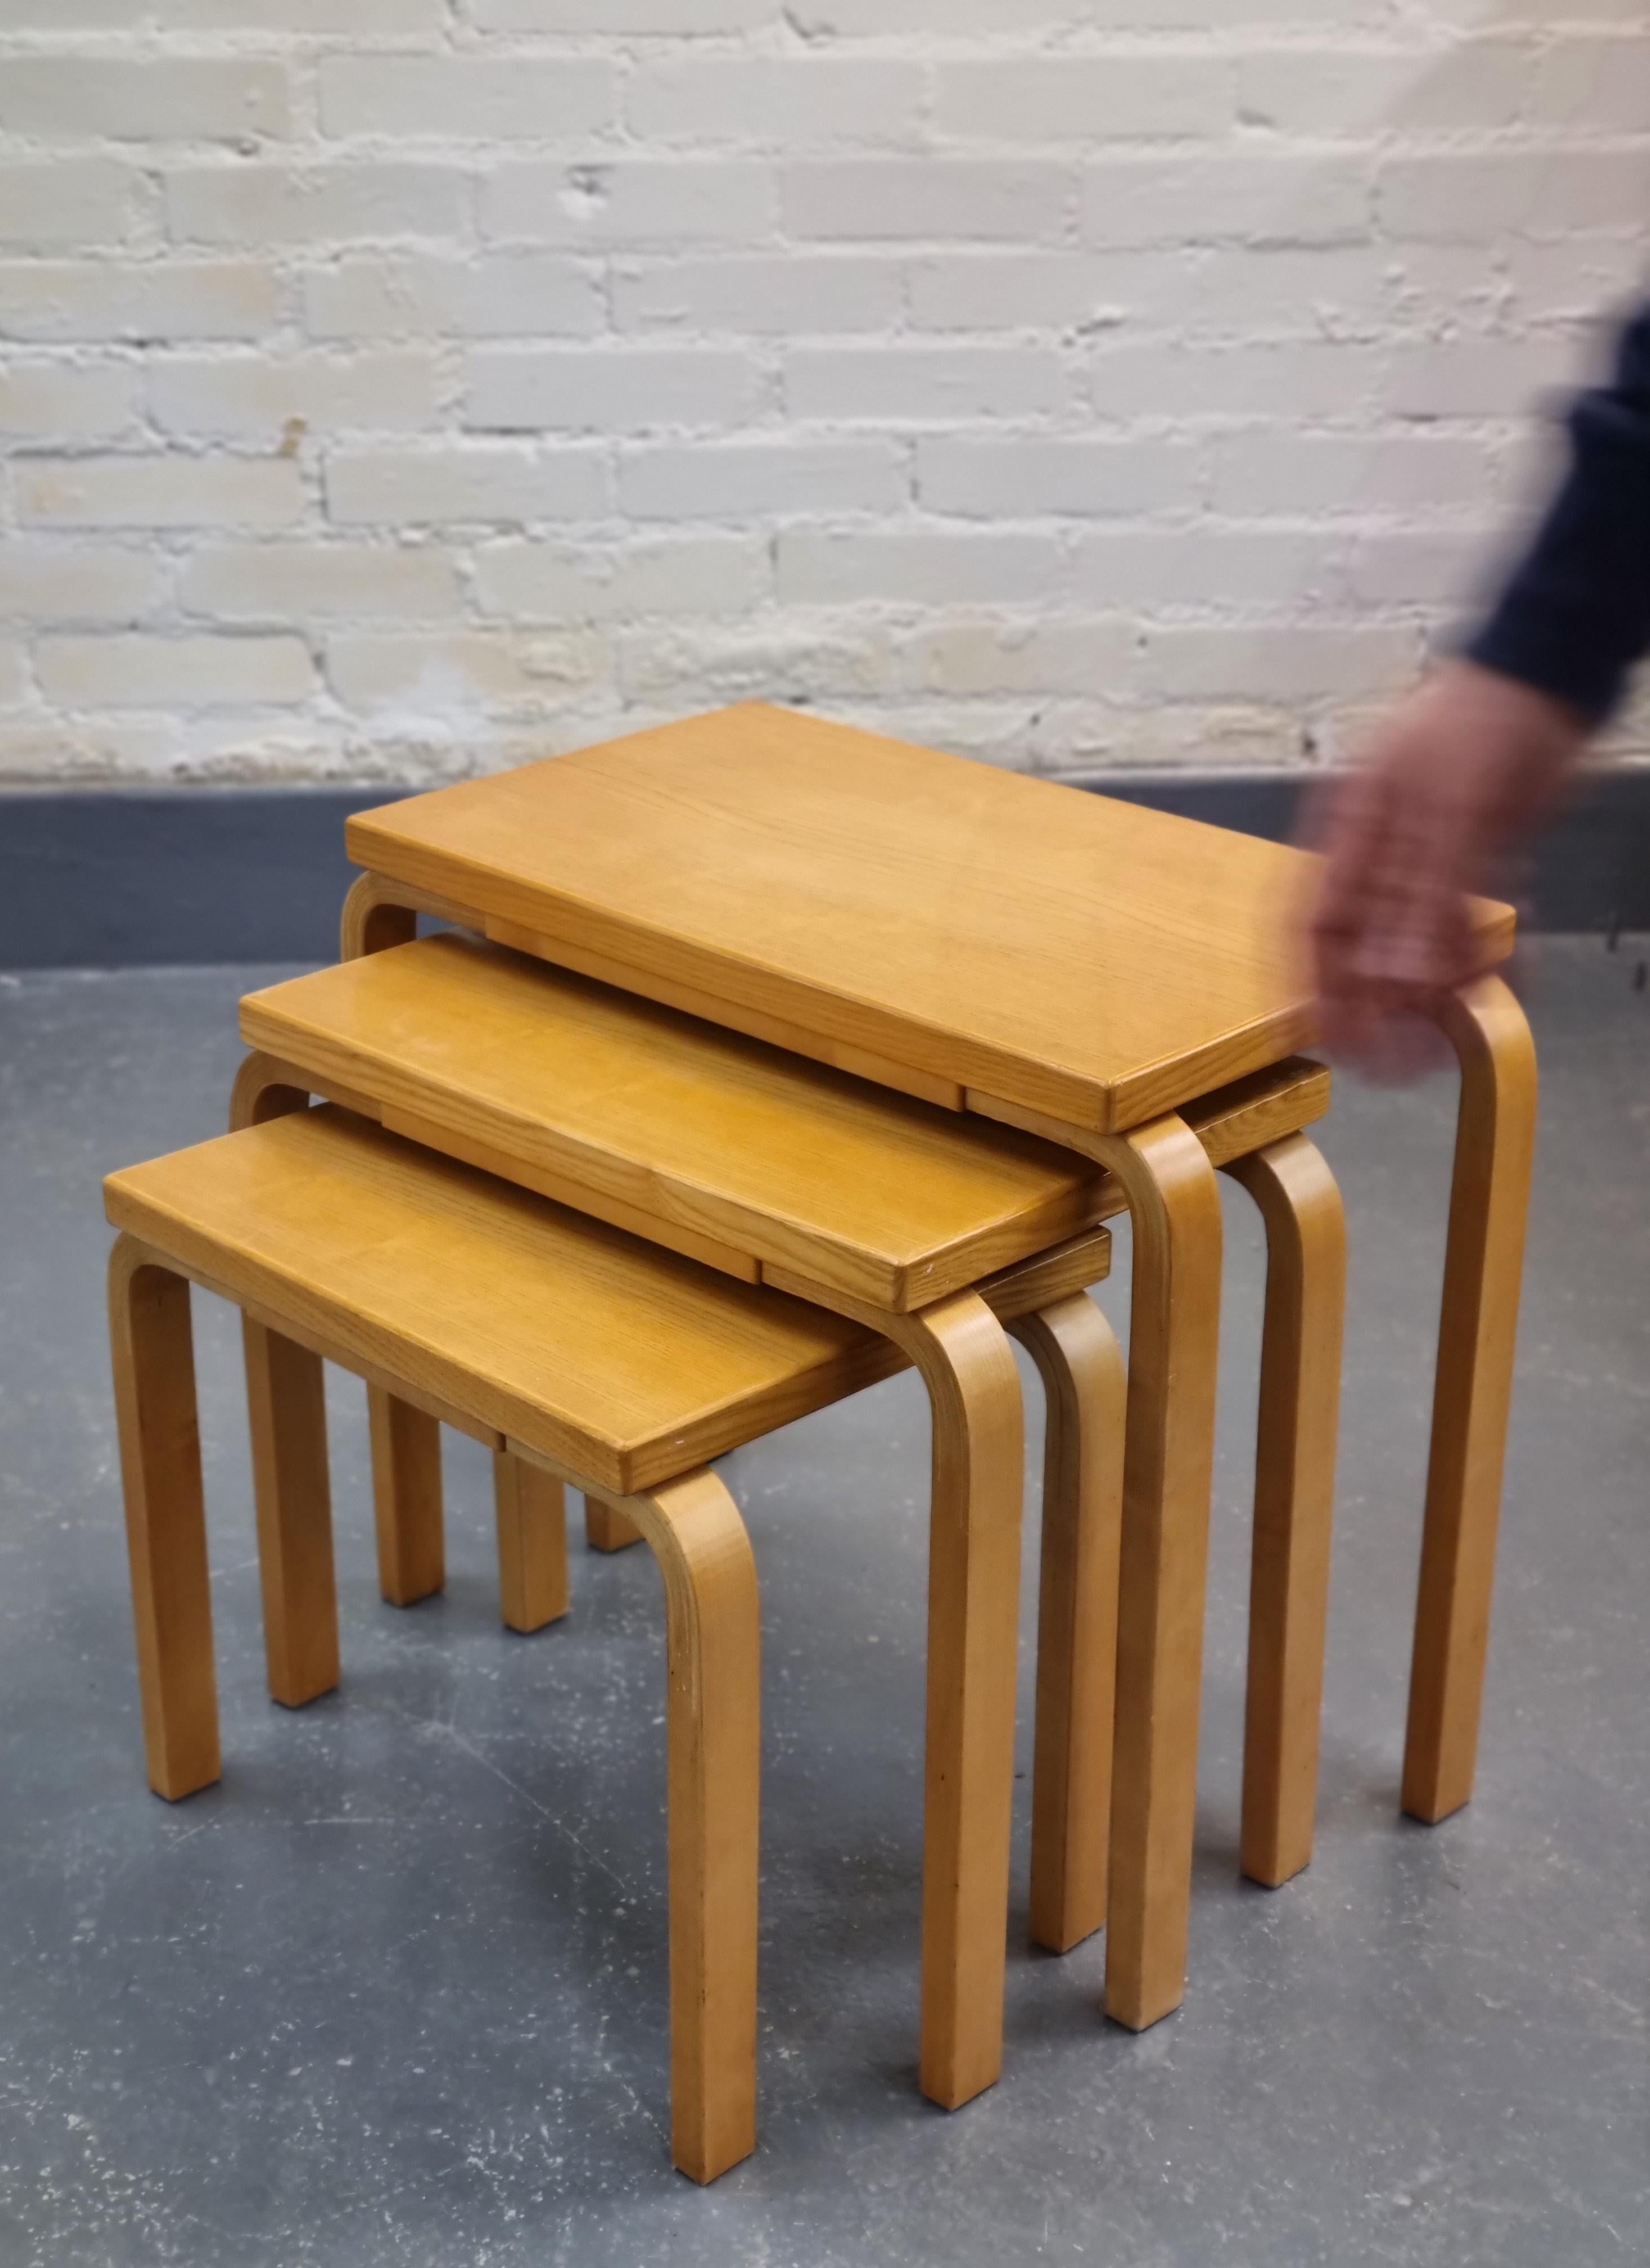 The perfect practical side table for any scandinavian or modern interior, especially with challenging spaces as you can save space with the nesting tables. Measuring 60x35, 52x35 and 44x35. 
The tables are in beautiful original condition and all are